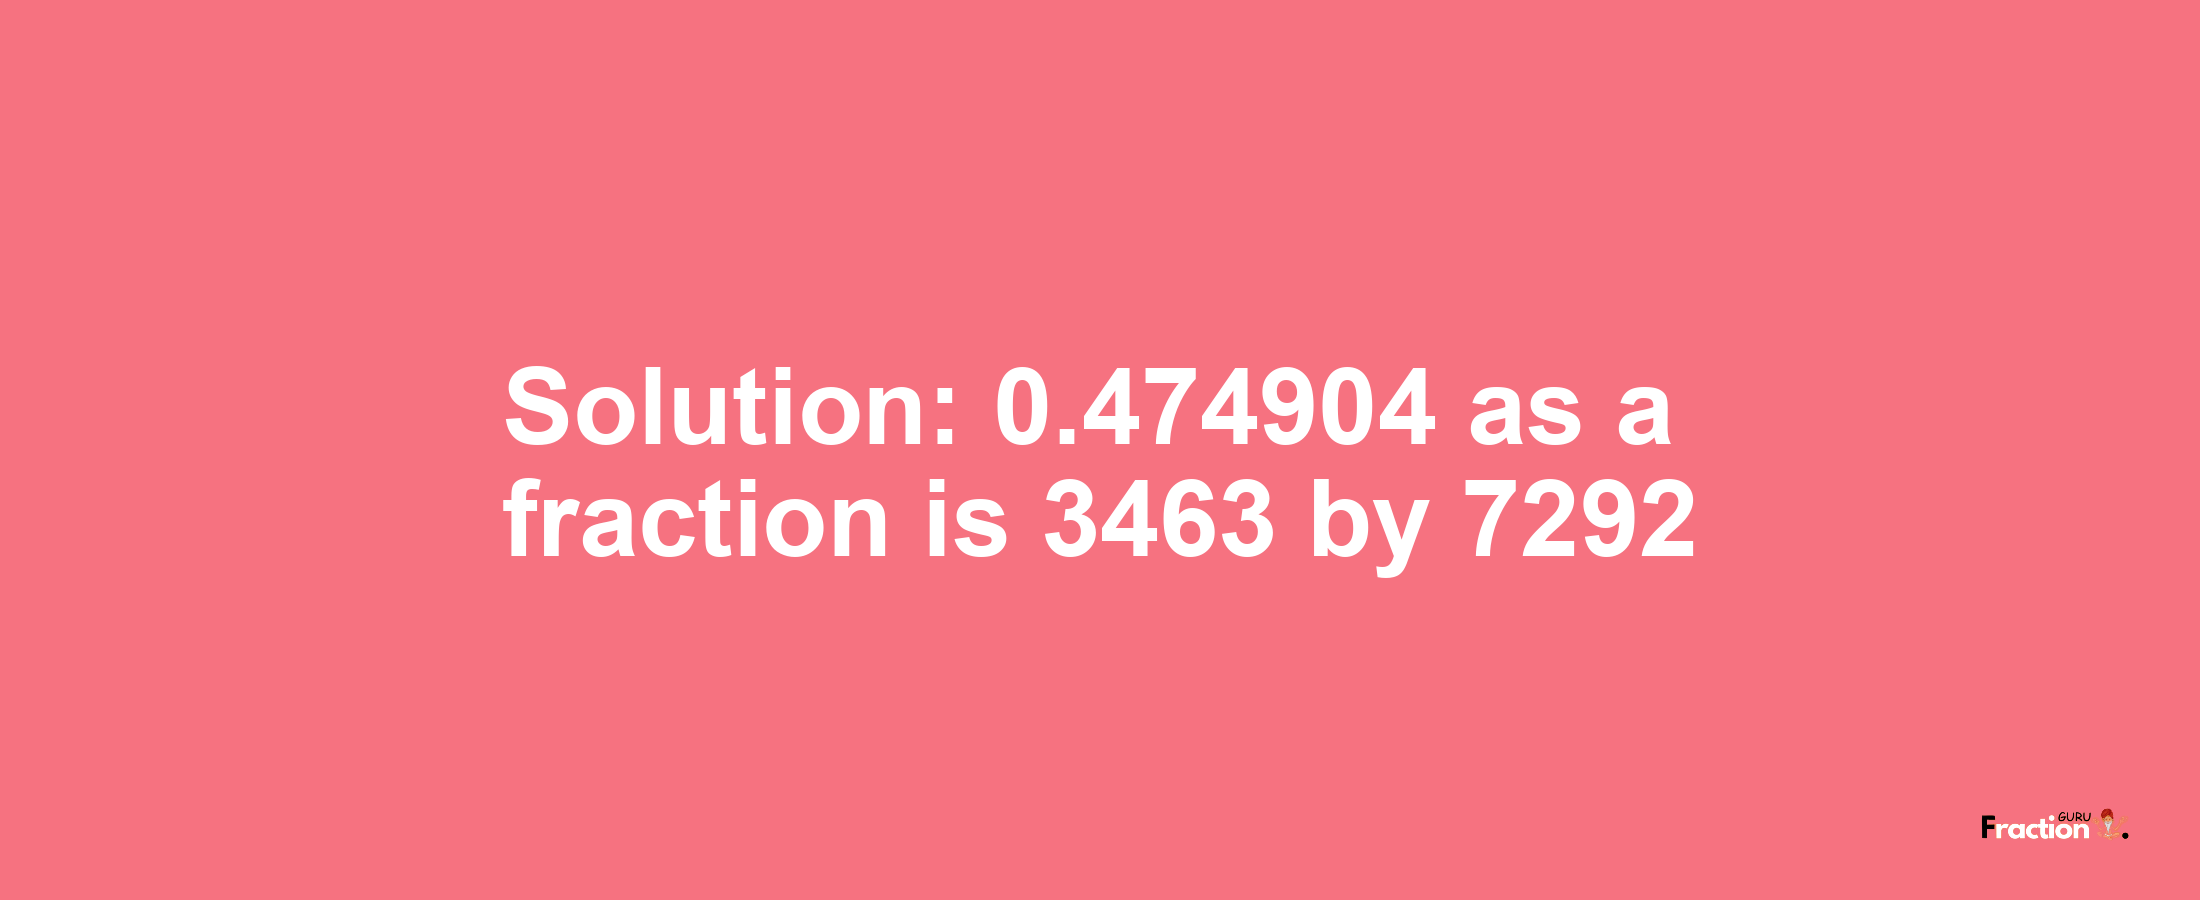 Solution:0.474904 as a fraction is 3463/7292